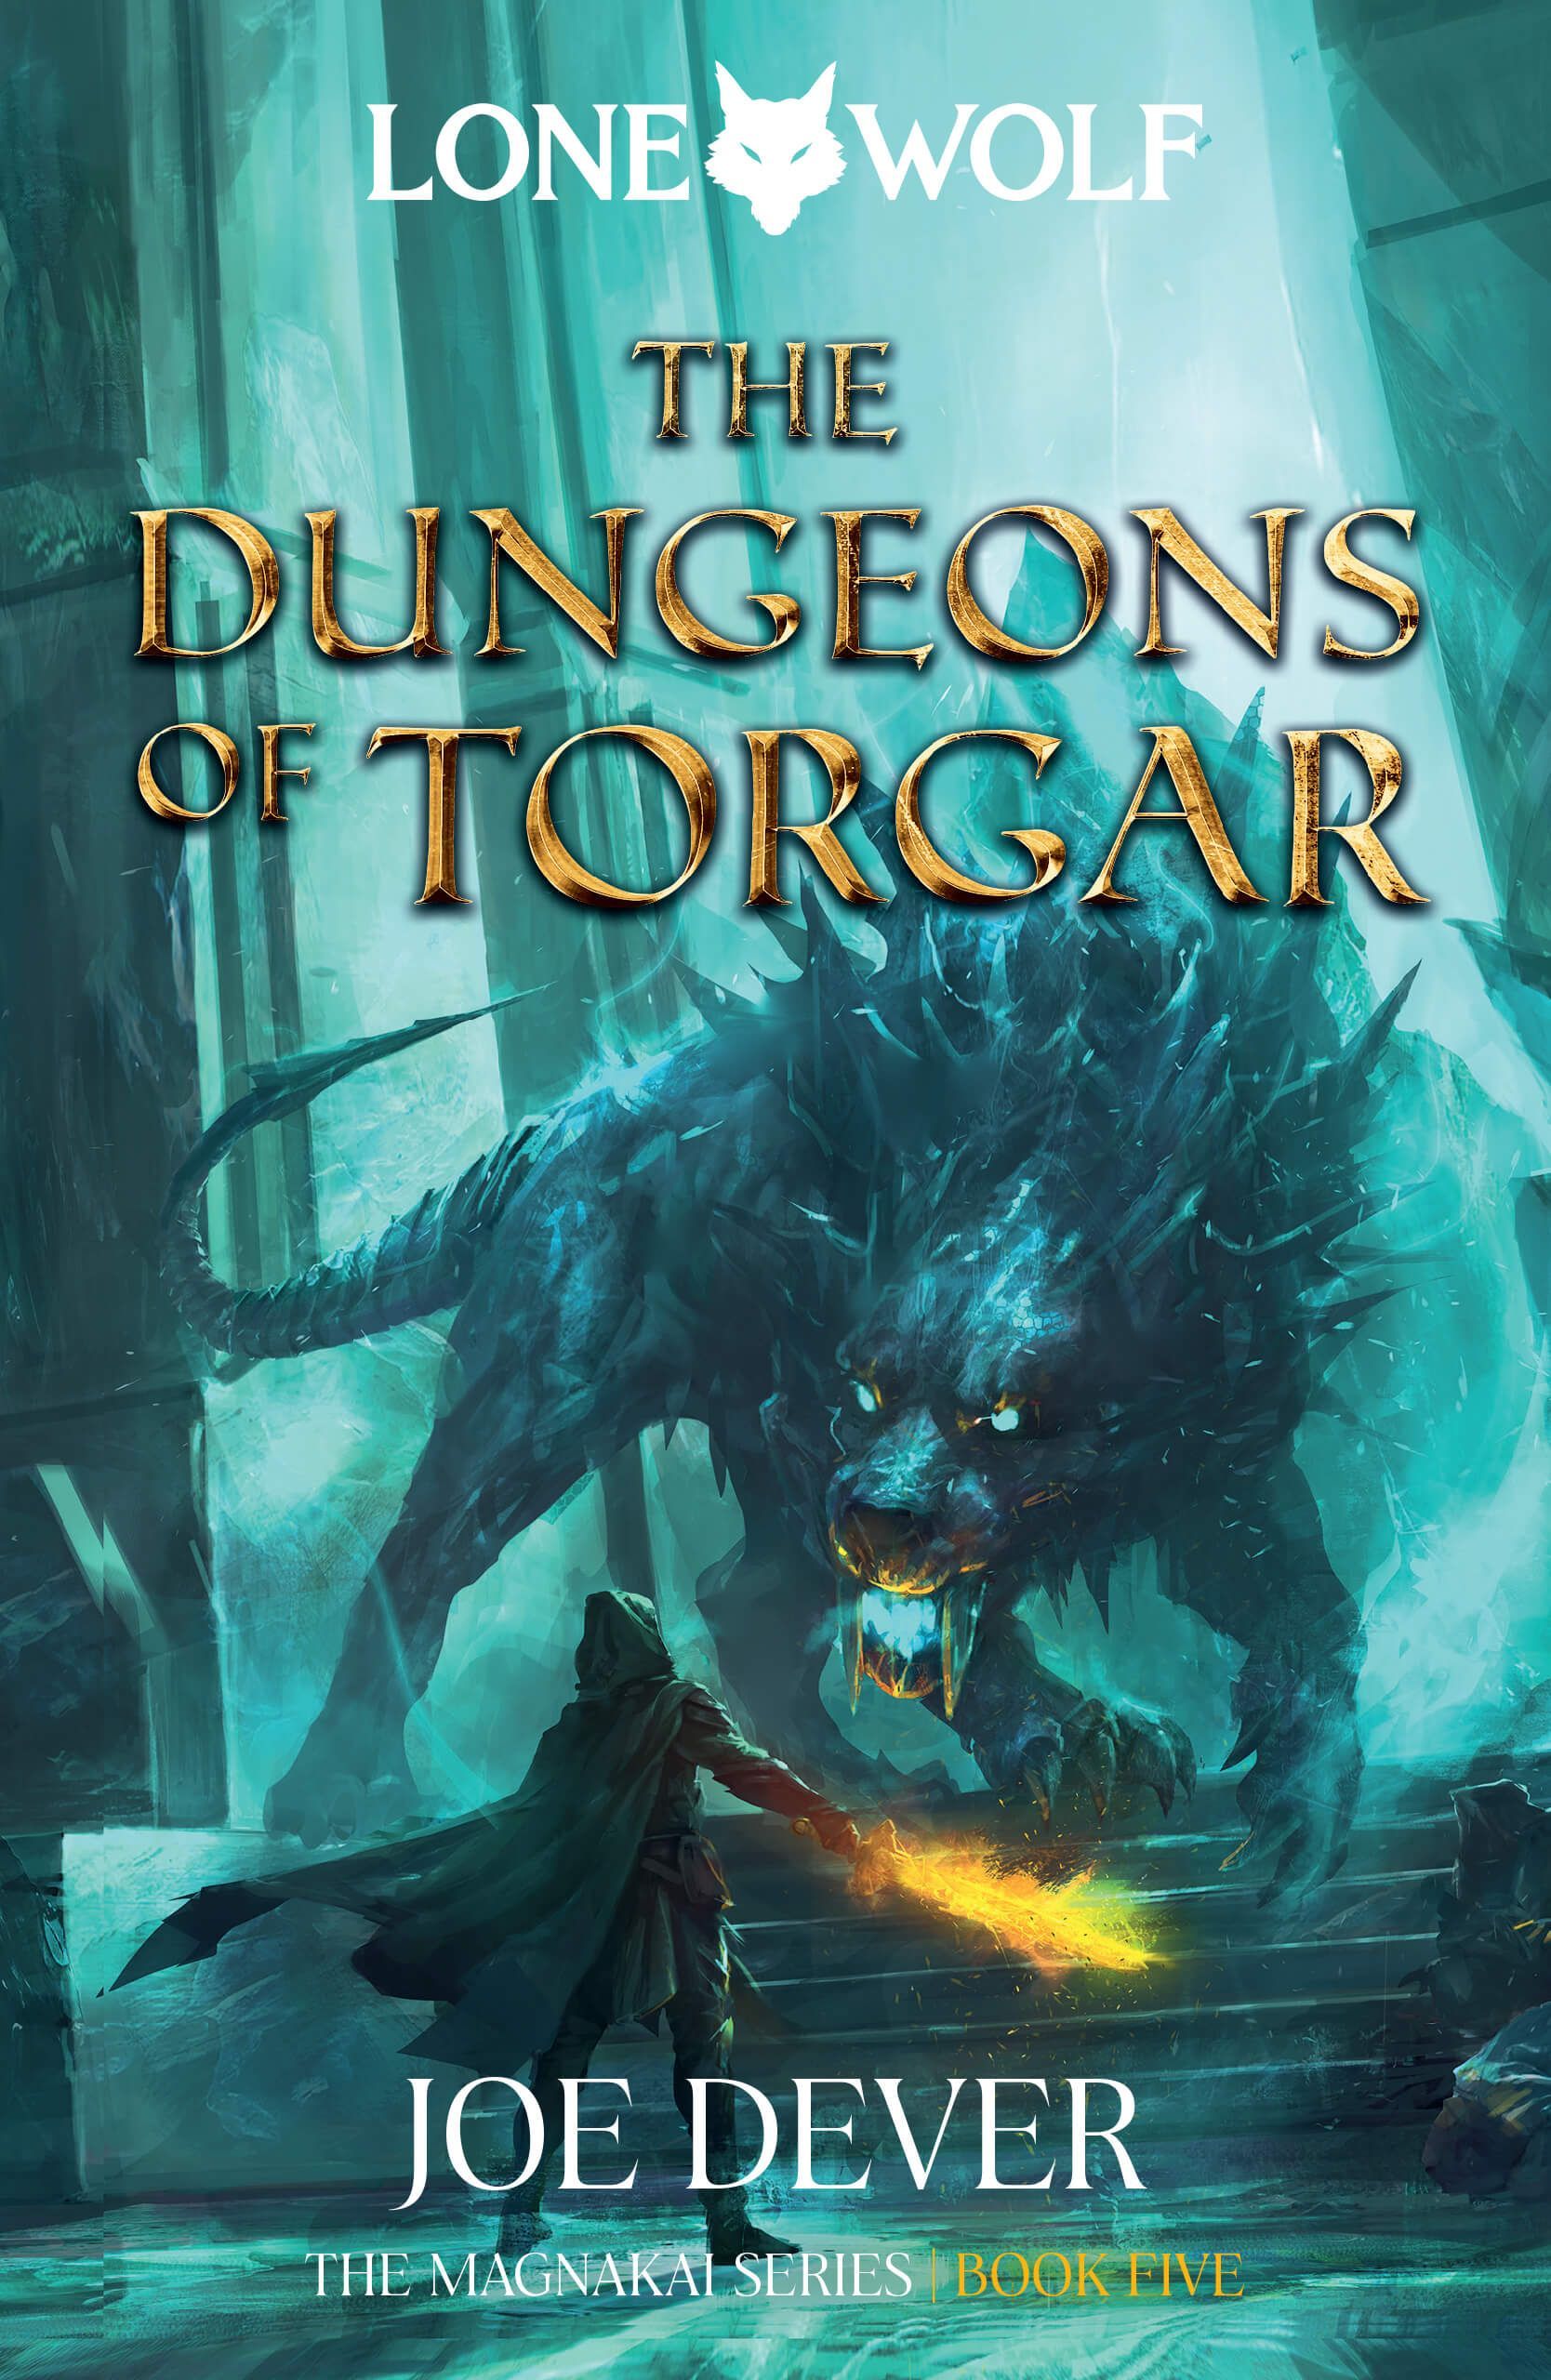 Full Colour Dust Jacket The Dungeons of Torgar: Lone Wolf #10 - HARDBACK